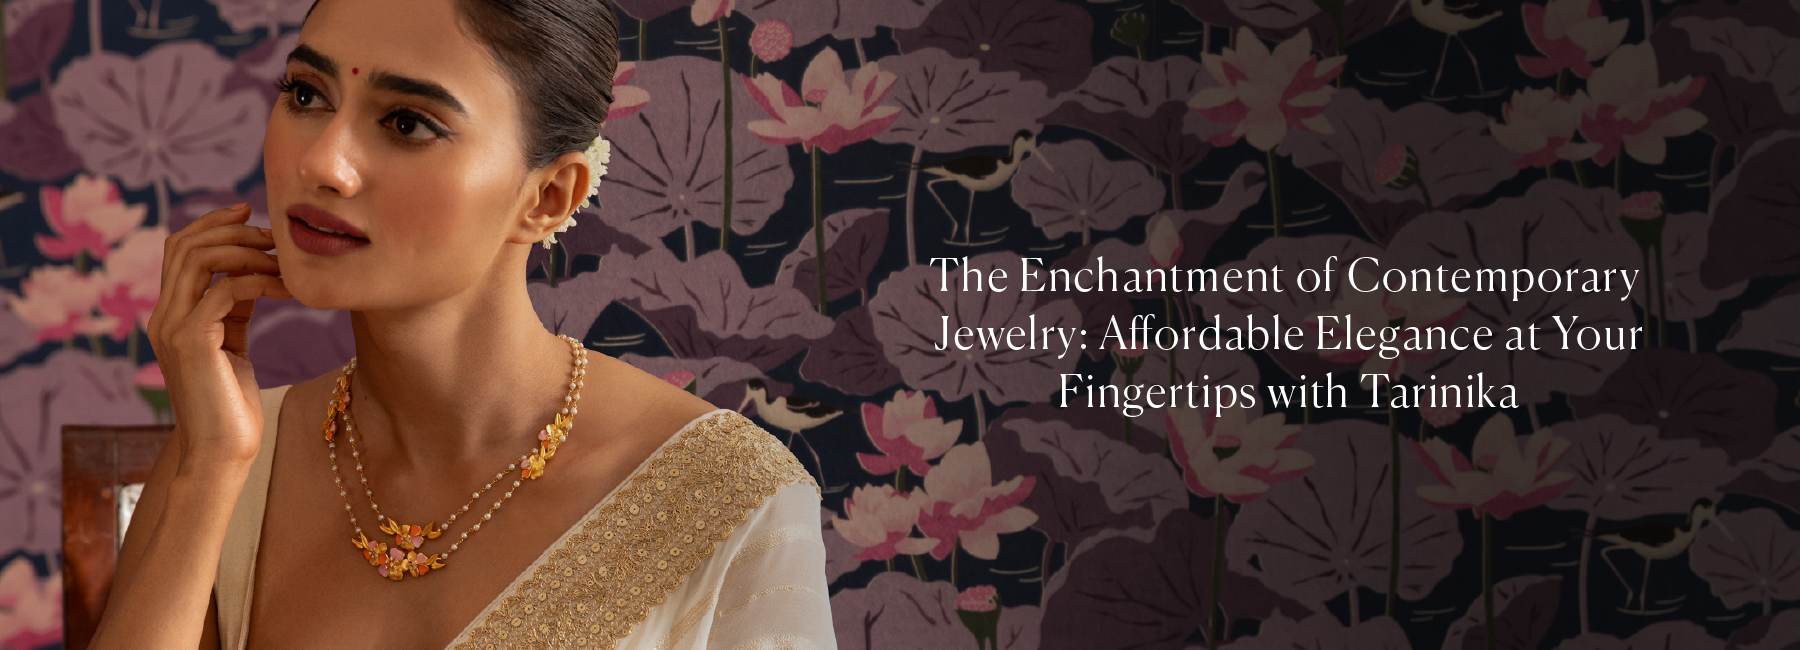 The Enchantment of Contemporary  Jewelry: Affordable Elegance at Your Fingertips with Tarinika